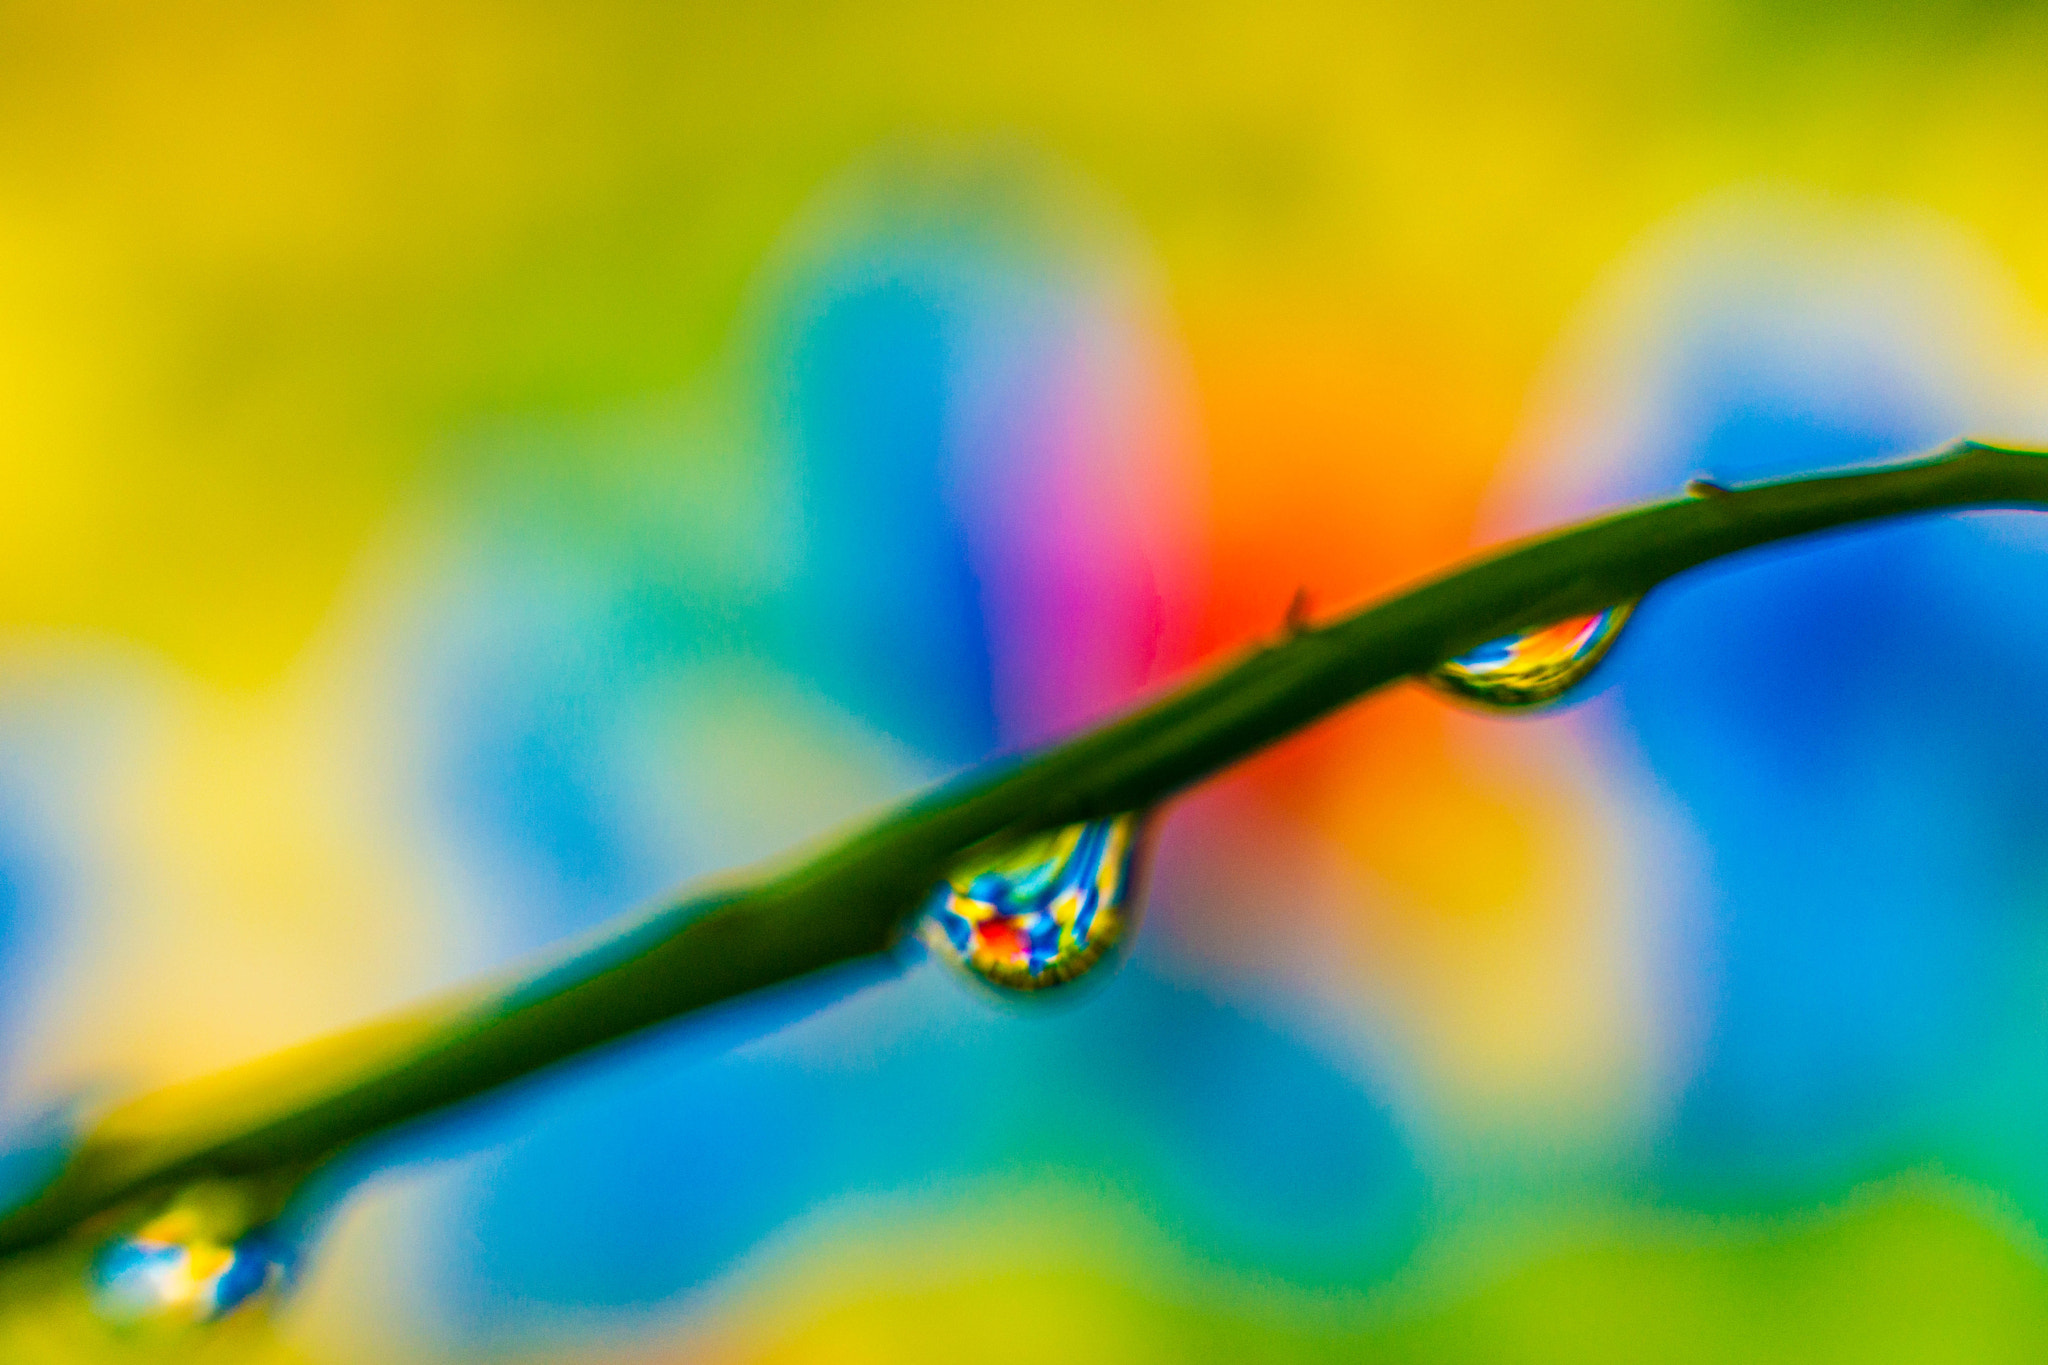 Sony SLT-A77 + Sony DT 50mm F1.8 SAM sample photo. Colorful water drops photography